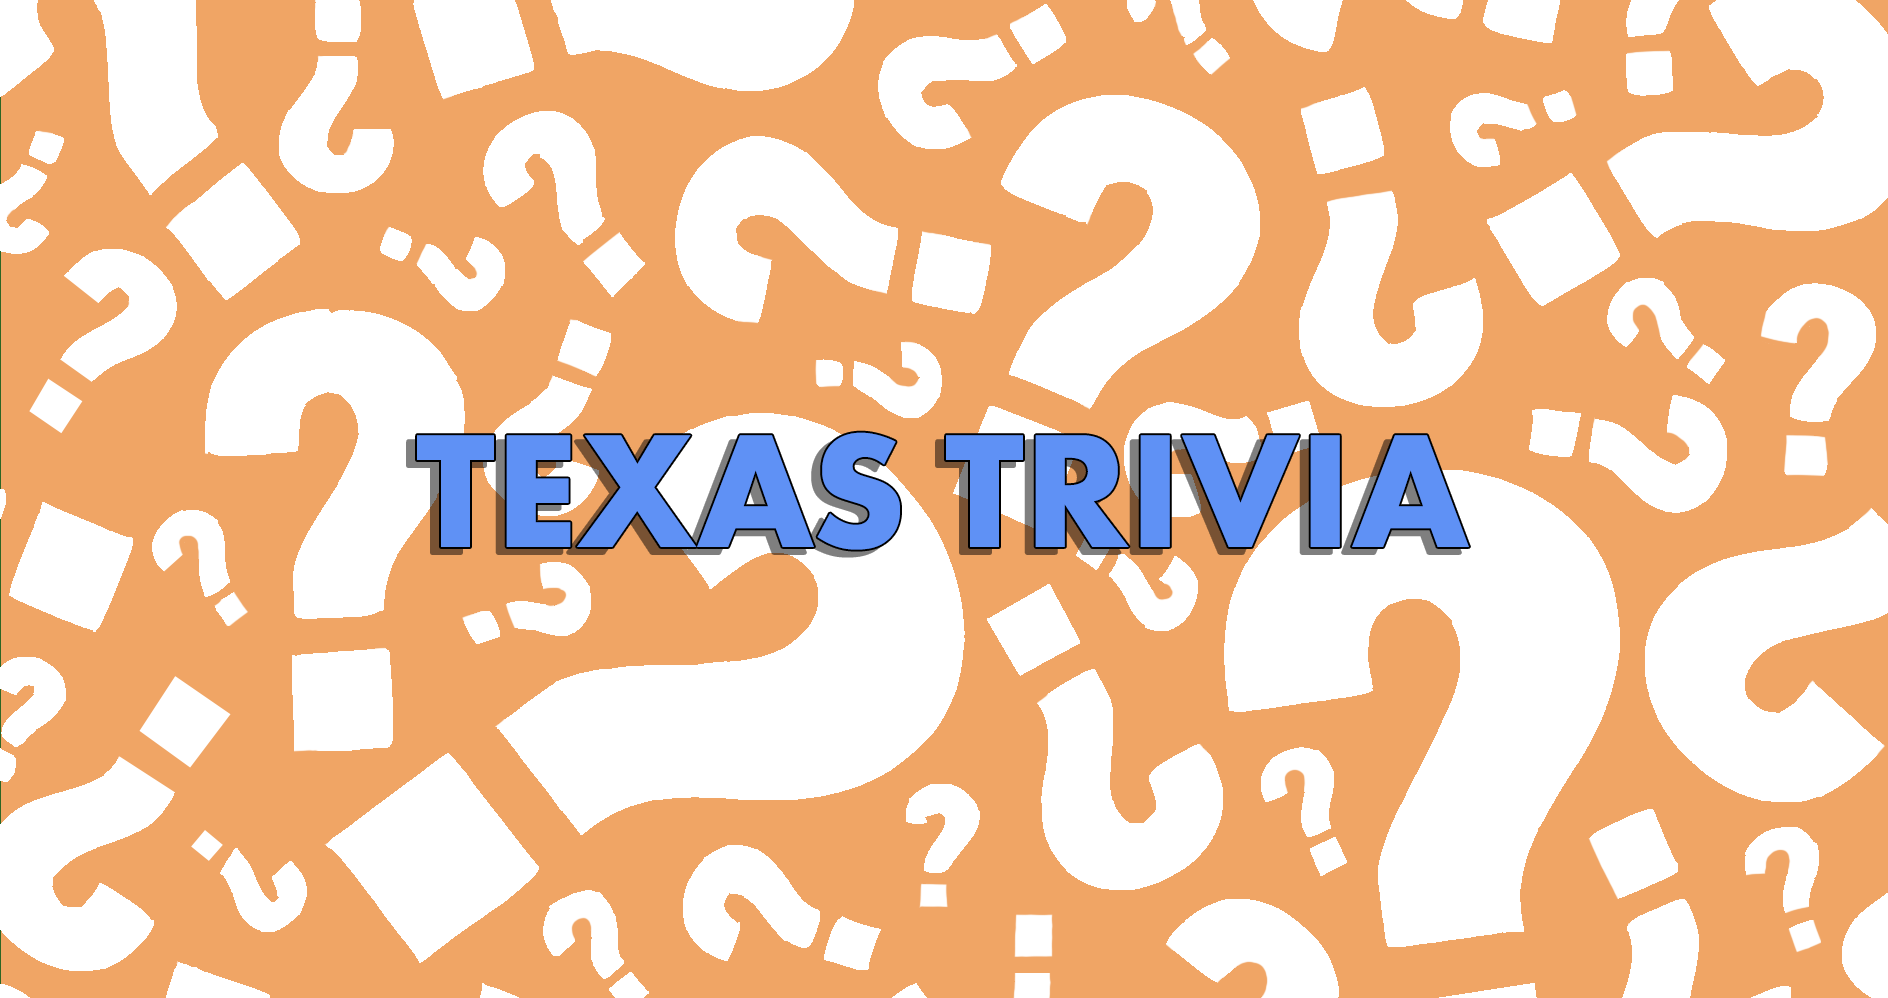 Texas Trivia: Y'all Asked for Harder